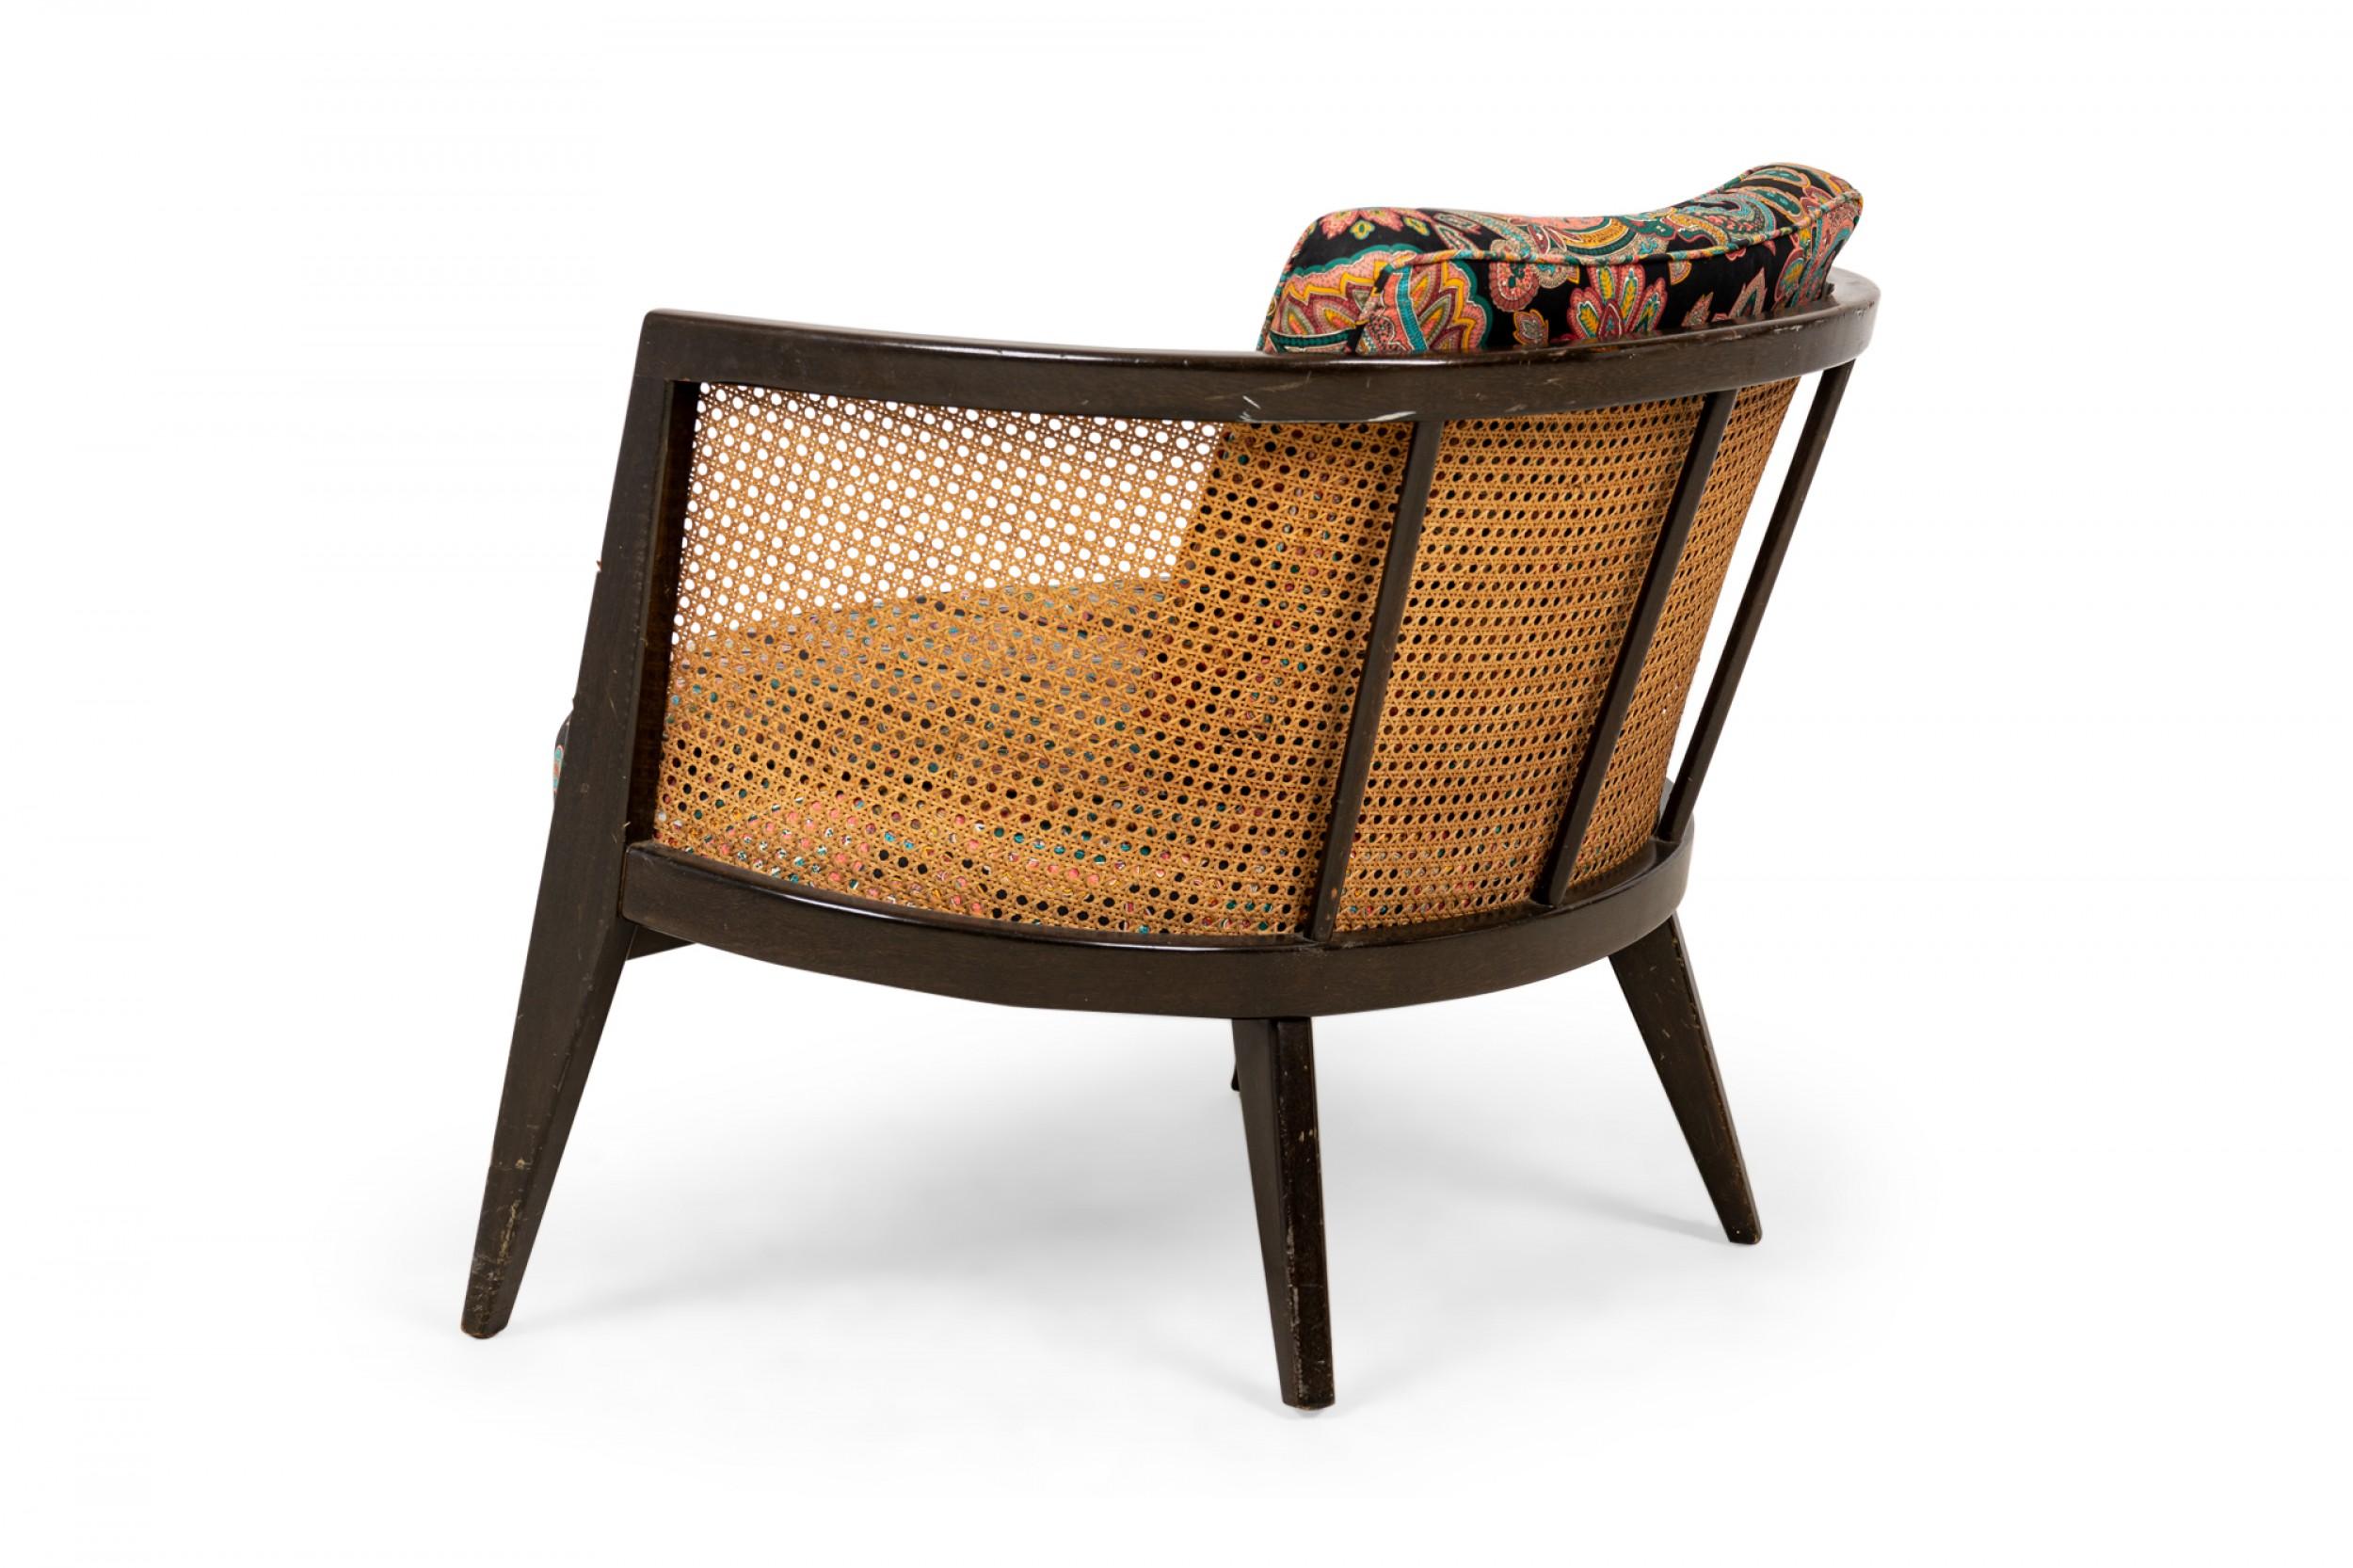 Mid-Century Modern Harvey Probber Wood, Caning, and Paisley Fabric Upholstered Hoop Lounge Chair For Sale